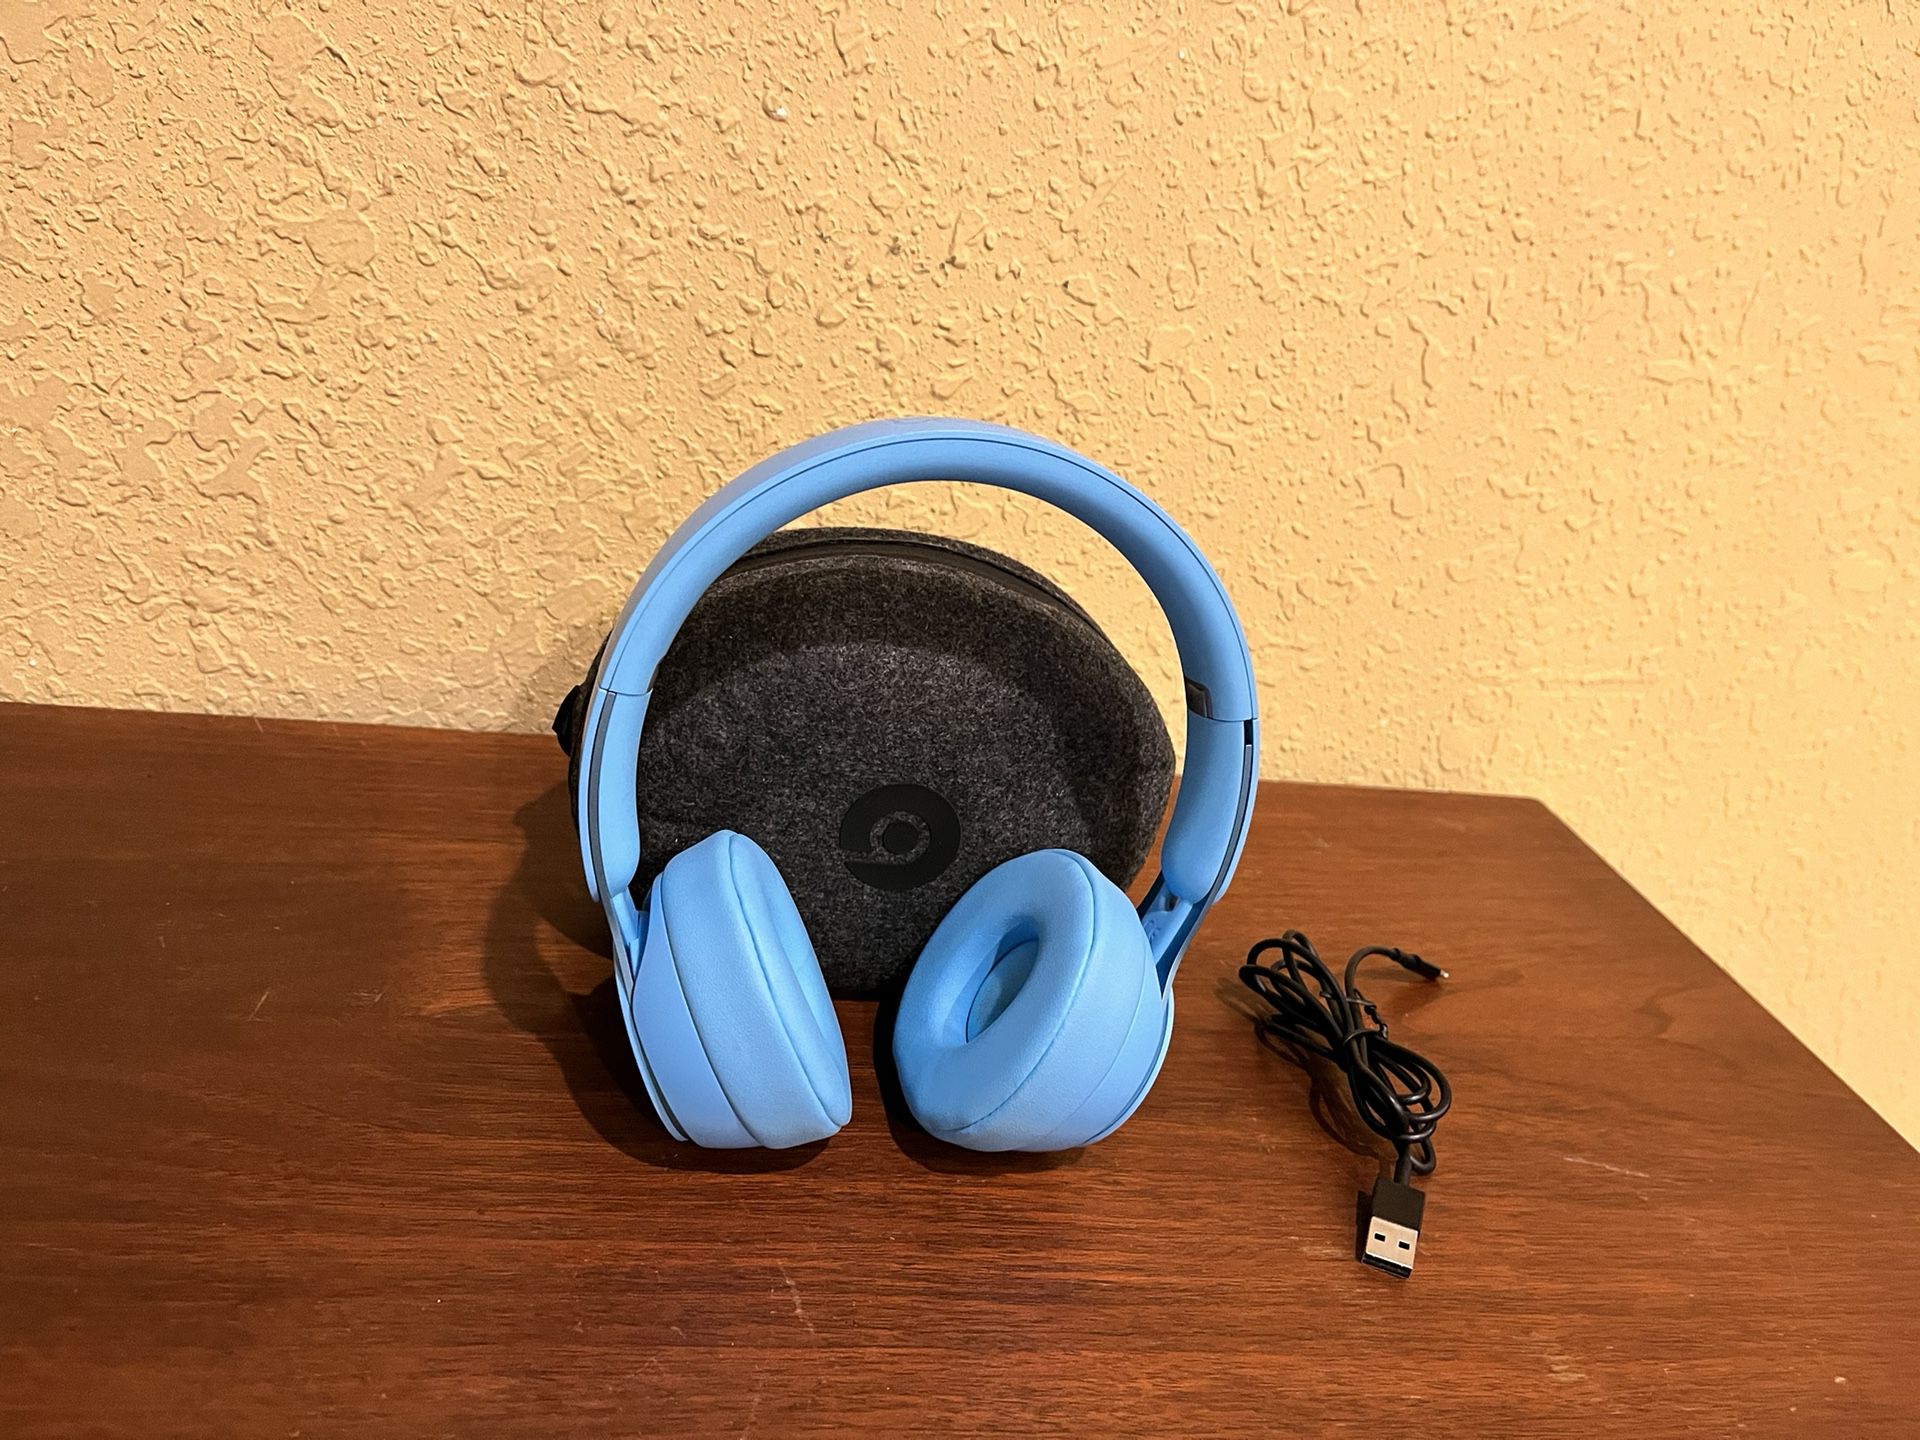 Beats Solo Pro Wireless Noise Cancellation On Ear Headphones, Lighting Port/Case…Light Blue… In Excellent Working Condition… Barely Used…$155 